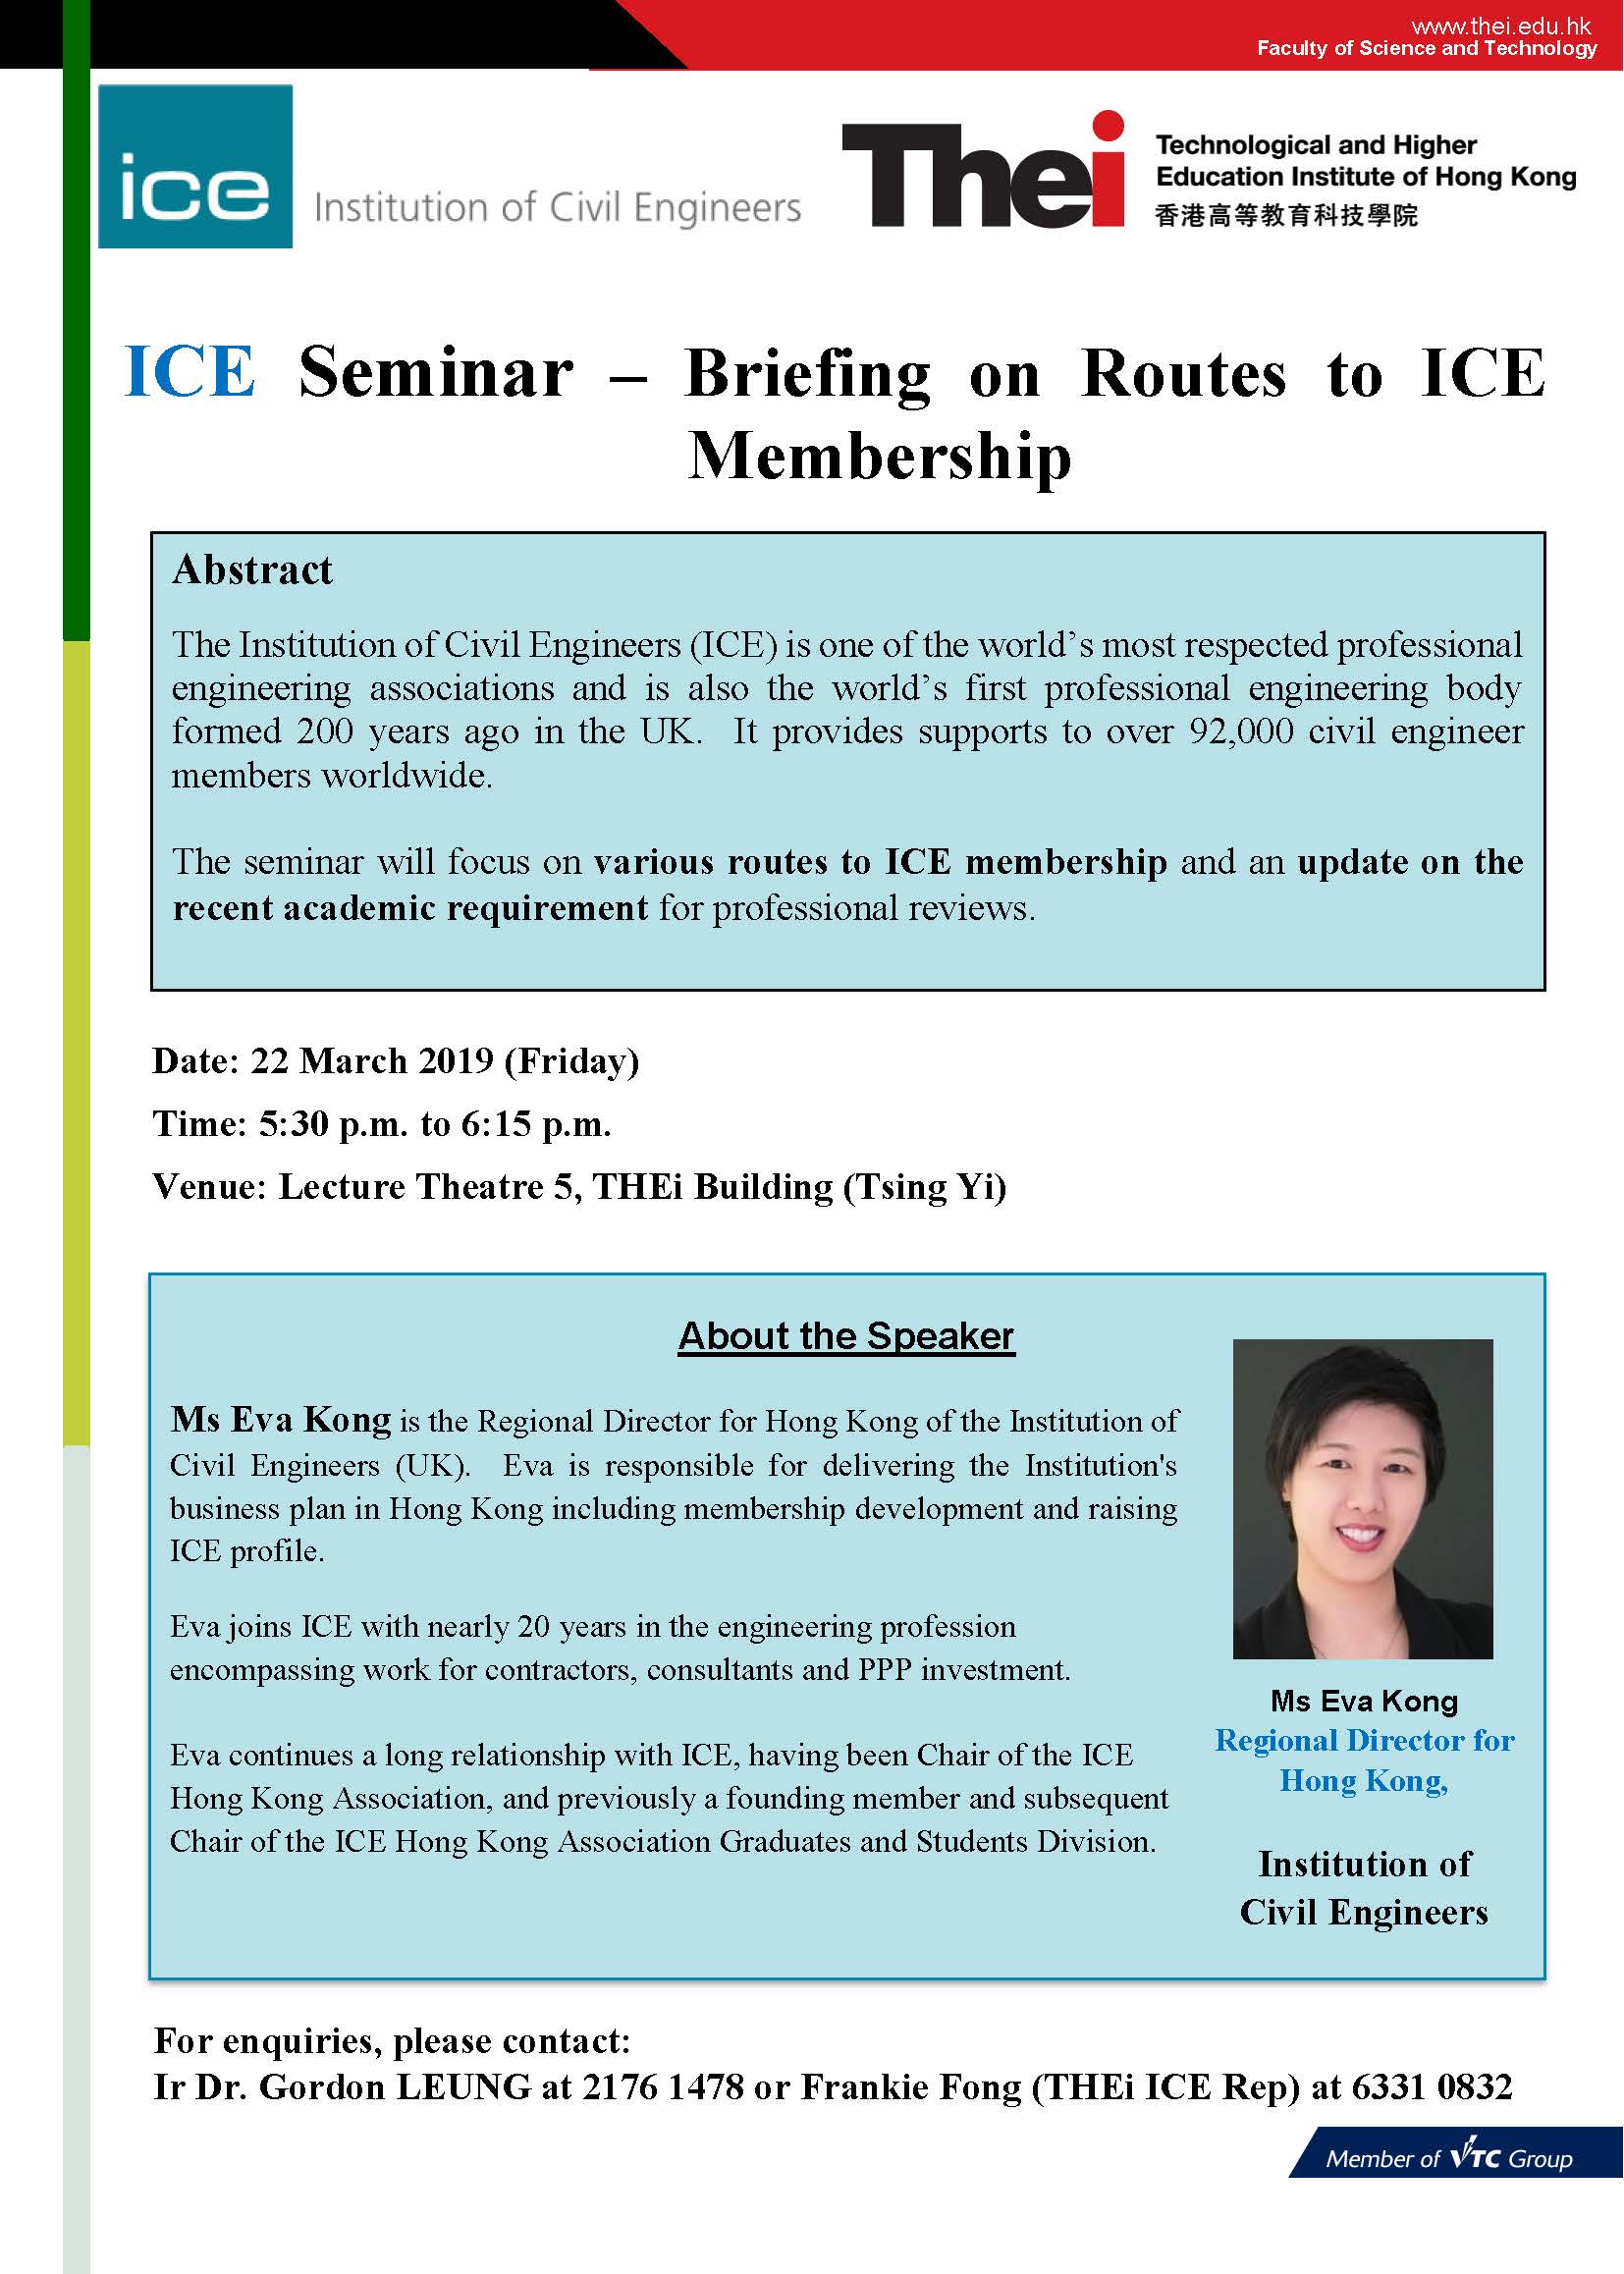 ICE Seminar – Briefing on Routes to ICE Membership